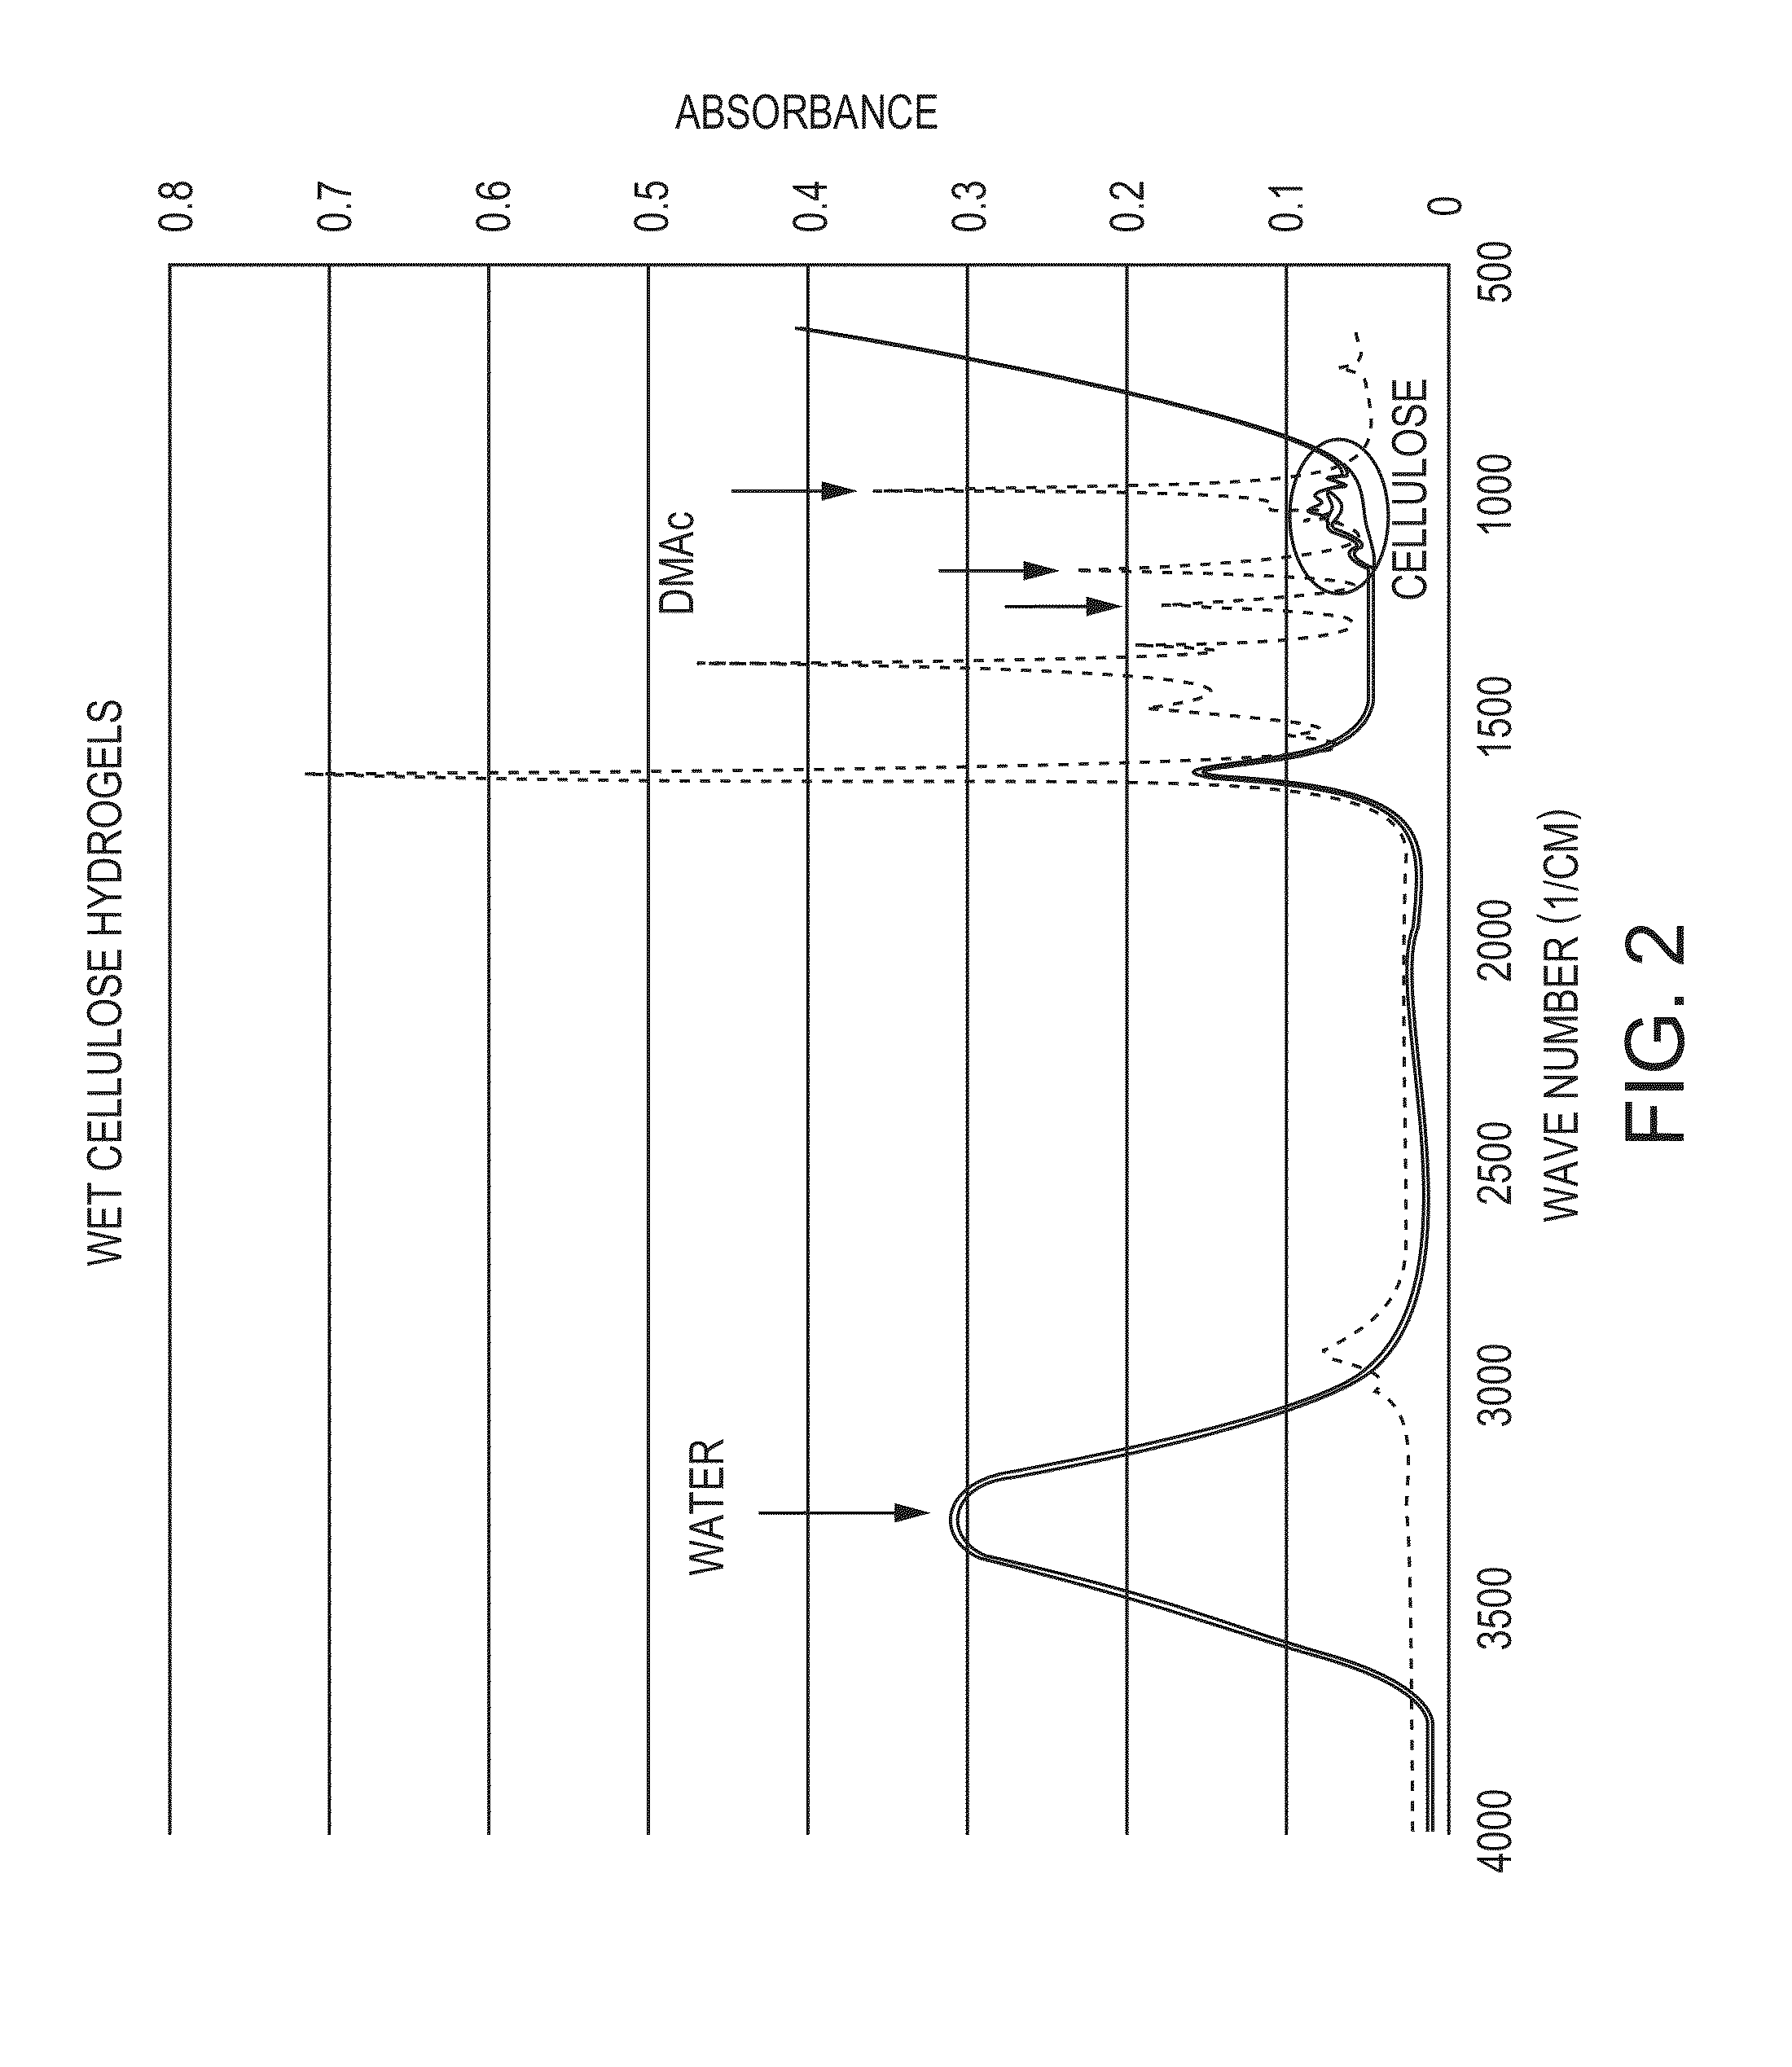 Cellulose-based hydrogels and methods of making thereof